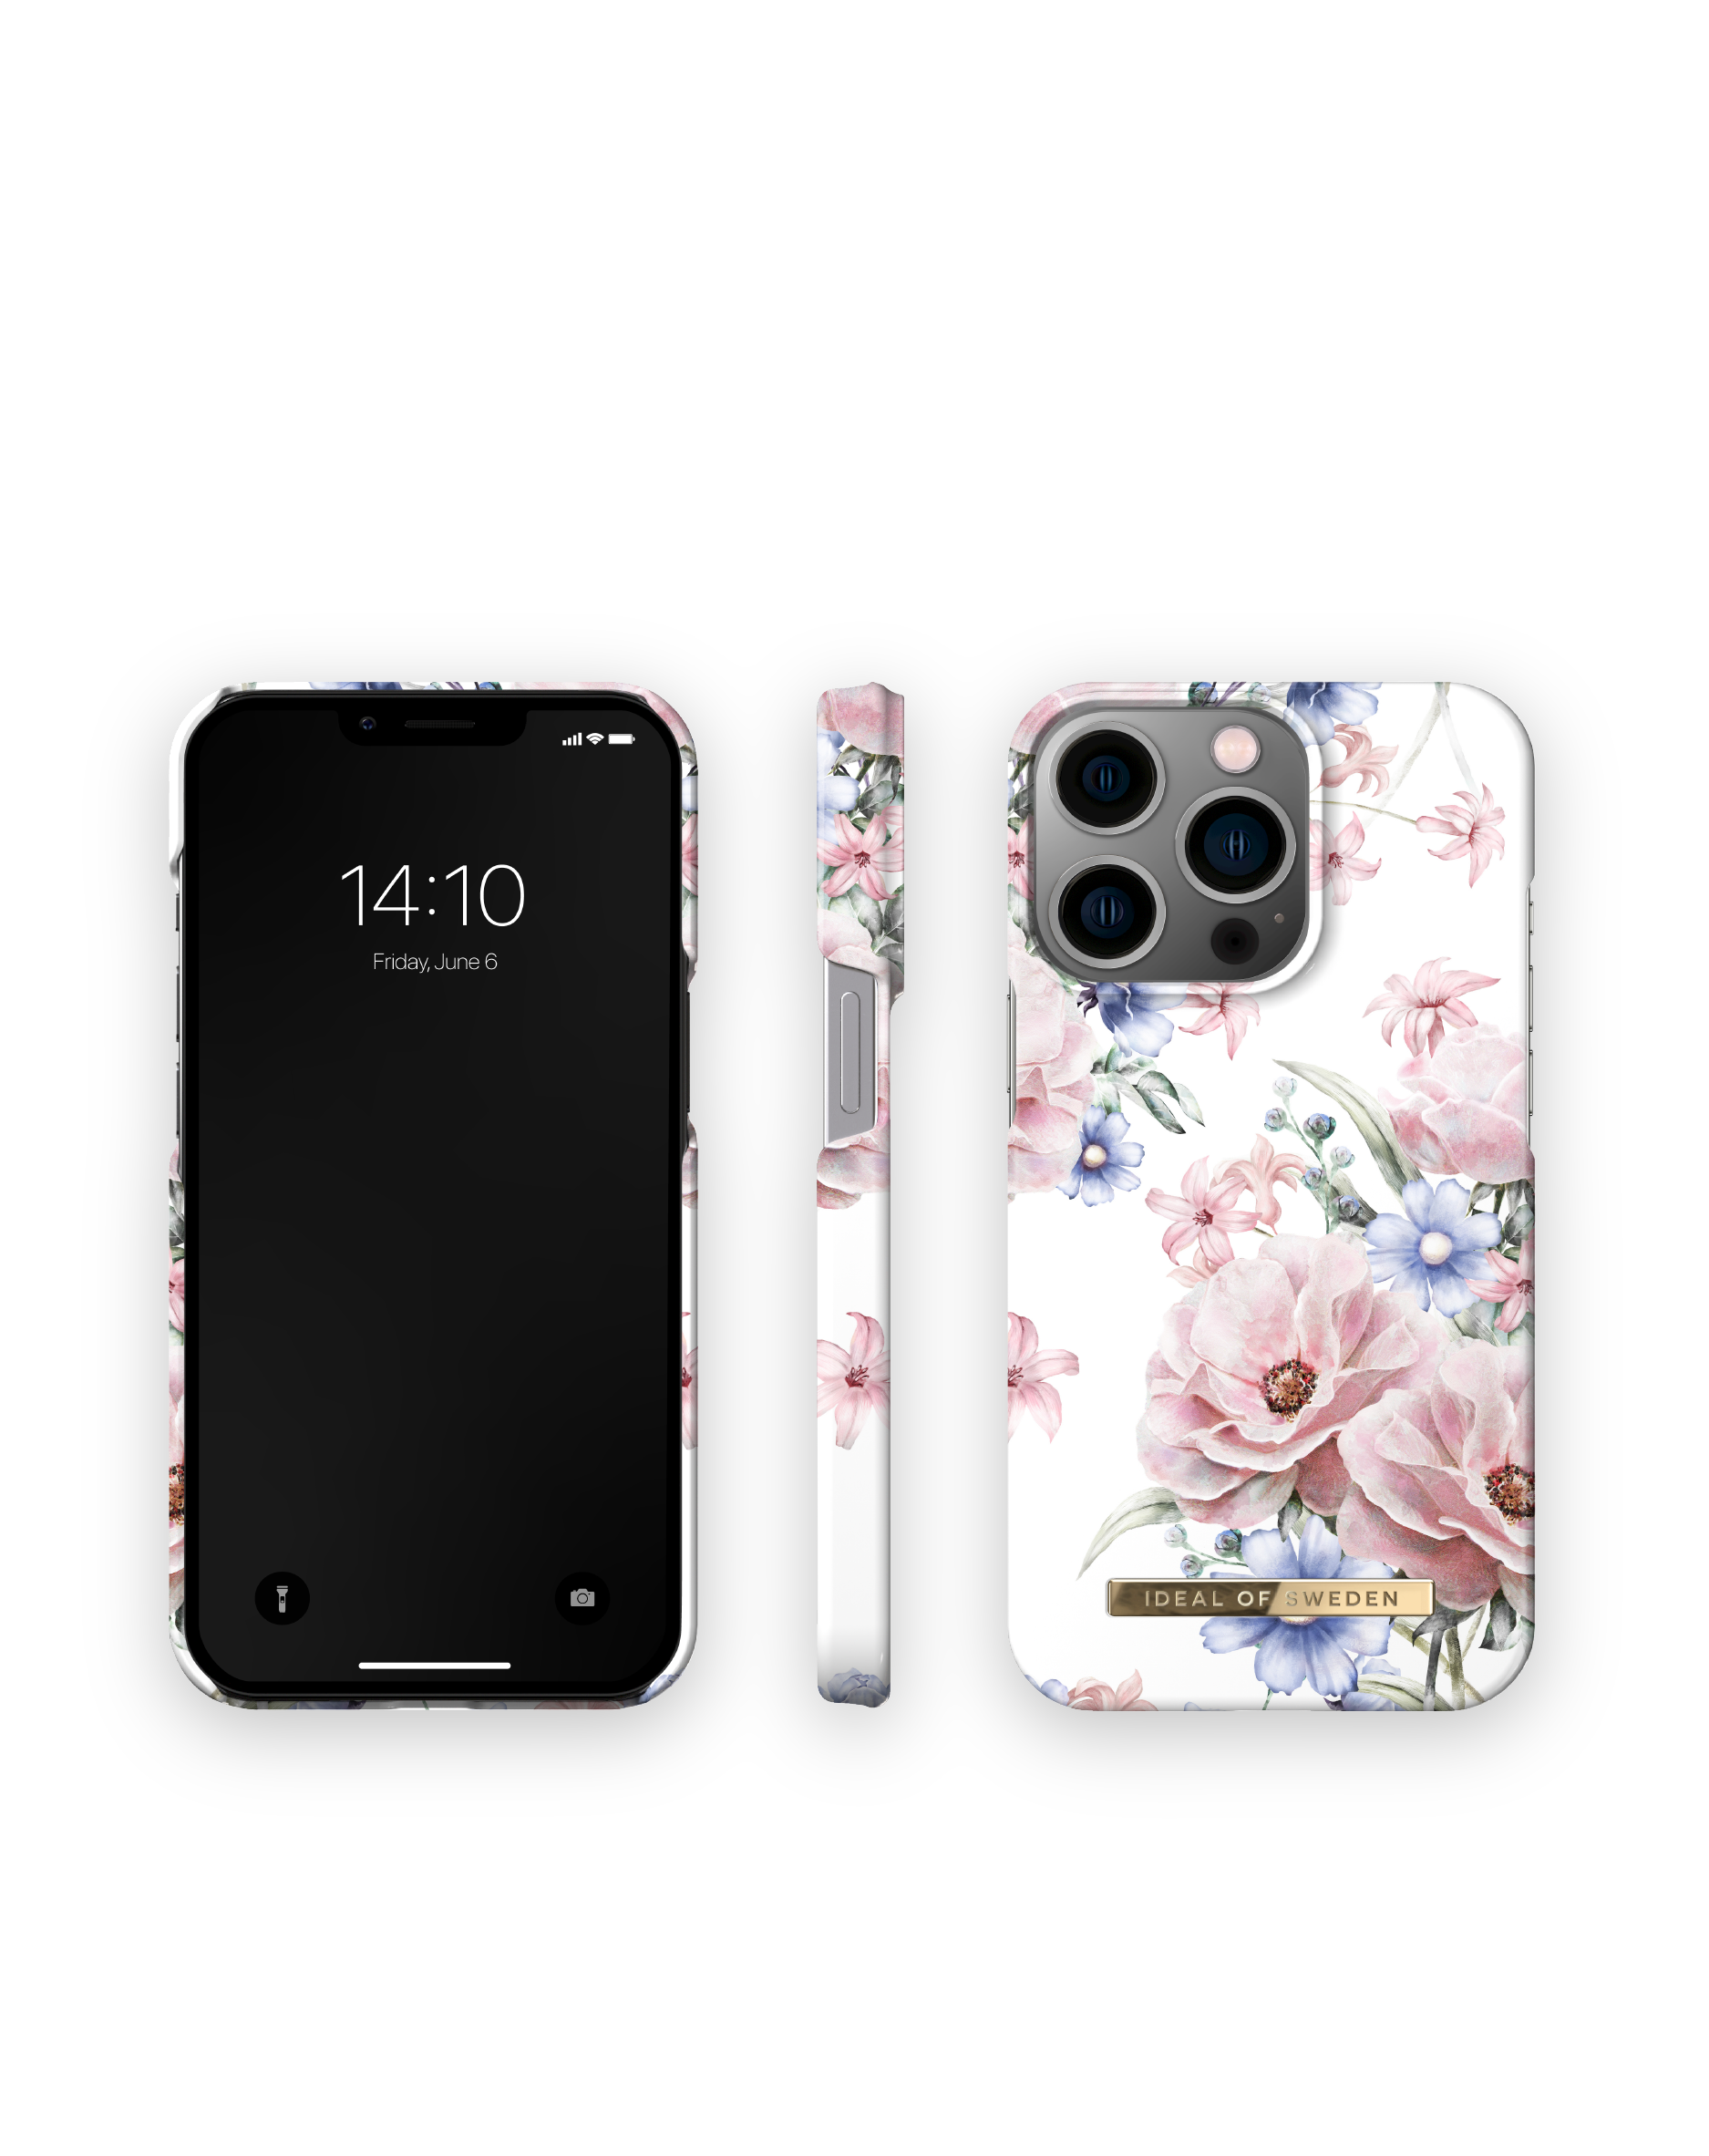 Apple, 14 Floral IDFCSS17-I2261P-58, Pro, Romance SWEDEN OF iPhone Backcover, IDEAL